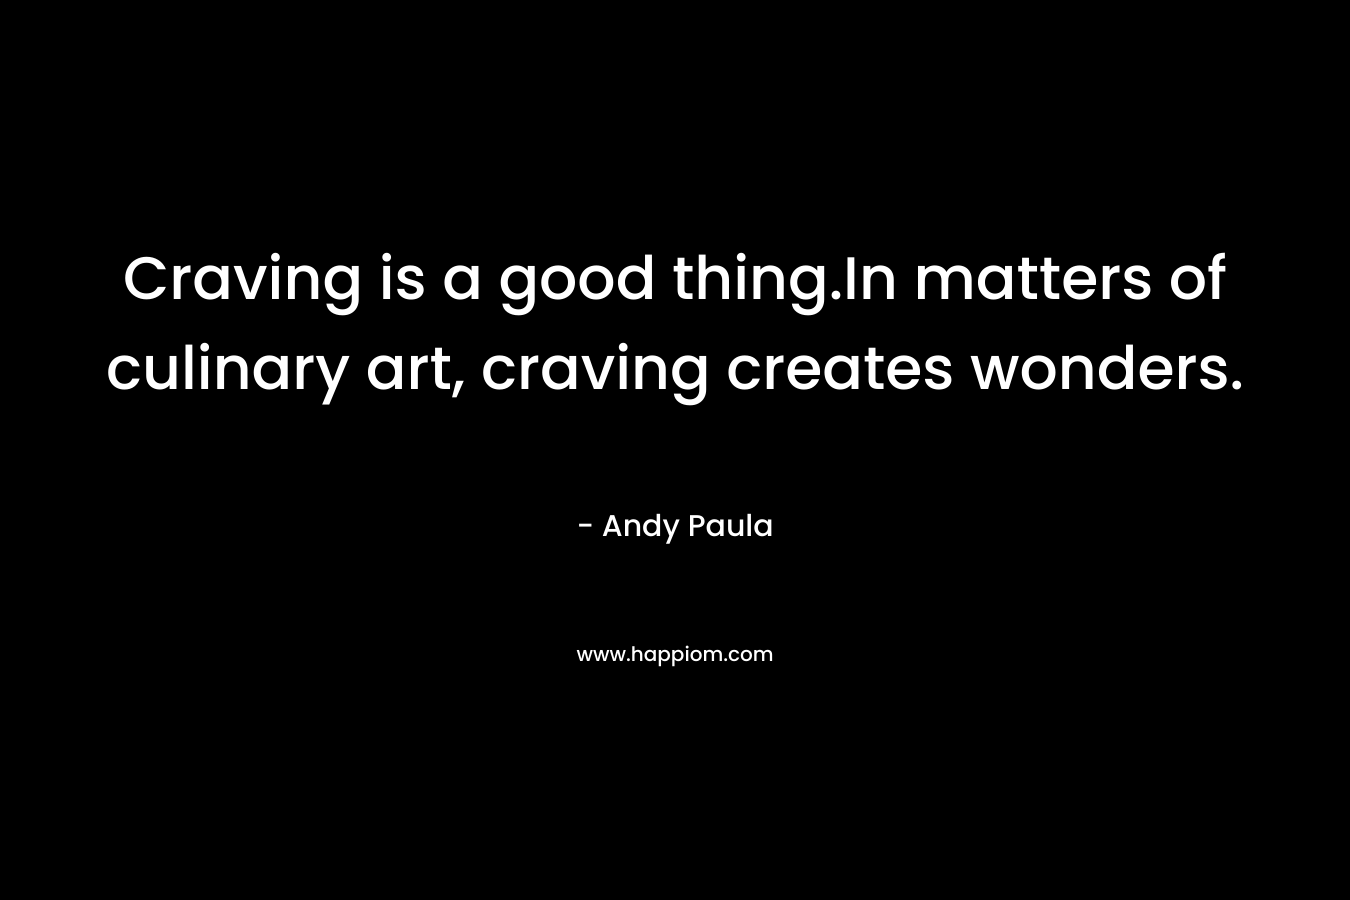 Craving is a good thing.In matters of culinary art, craving creates wonders. – Andy Paula